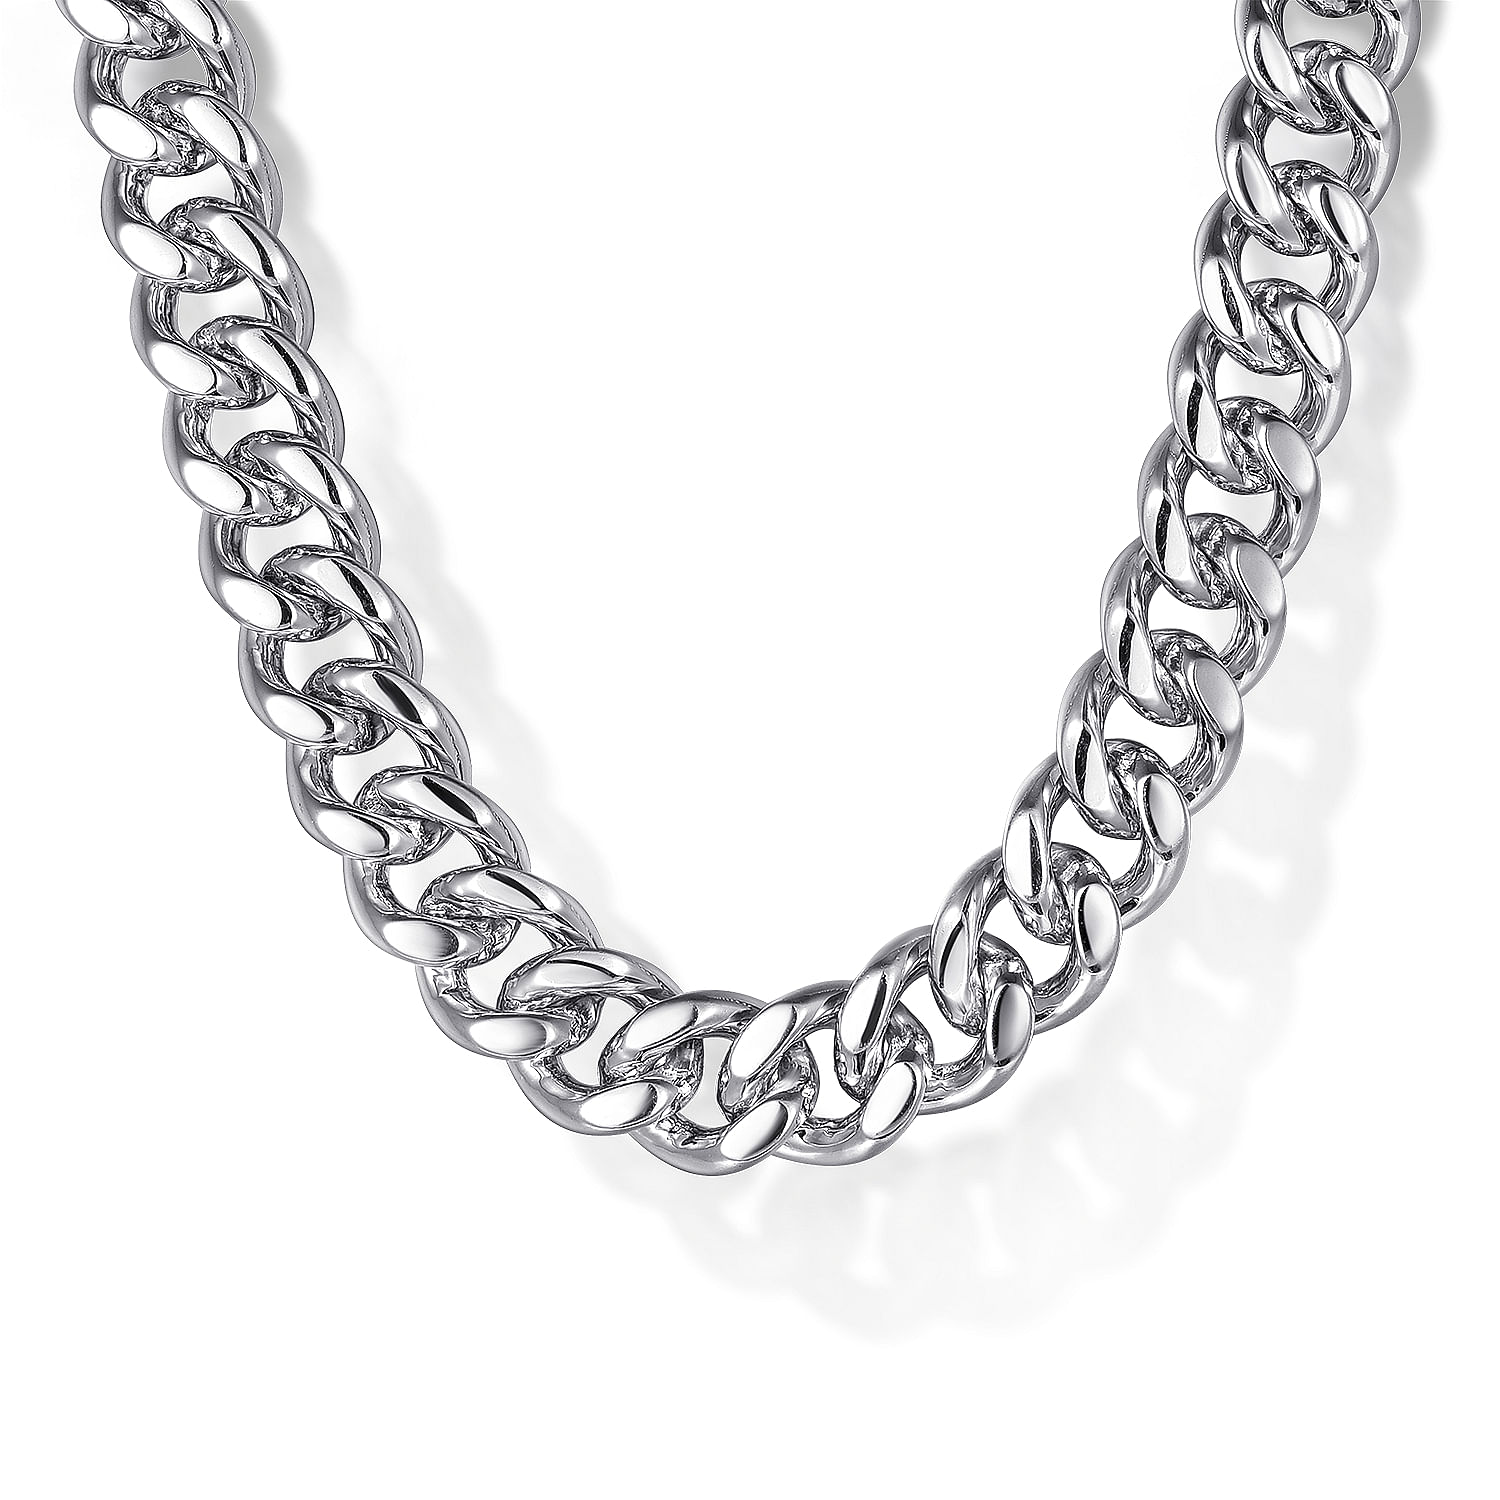 Gabriel - 22 Inch 7mm 925 Sterling Silver Men's Link Chain with Diamond Cut Necklace